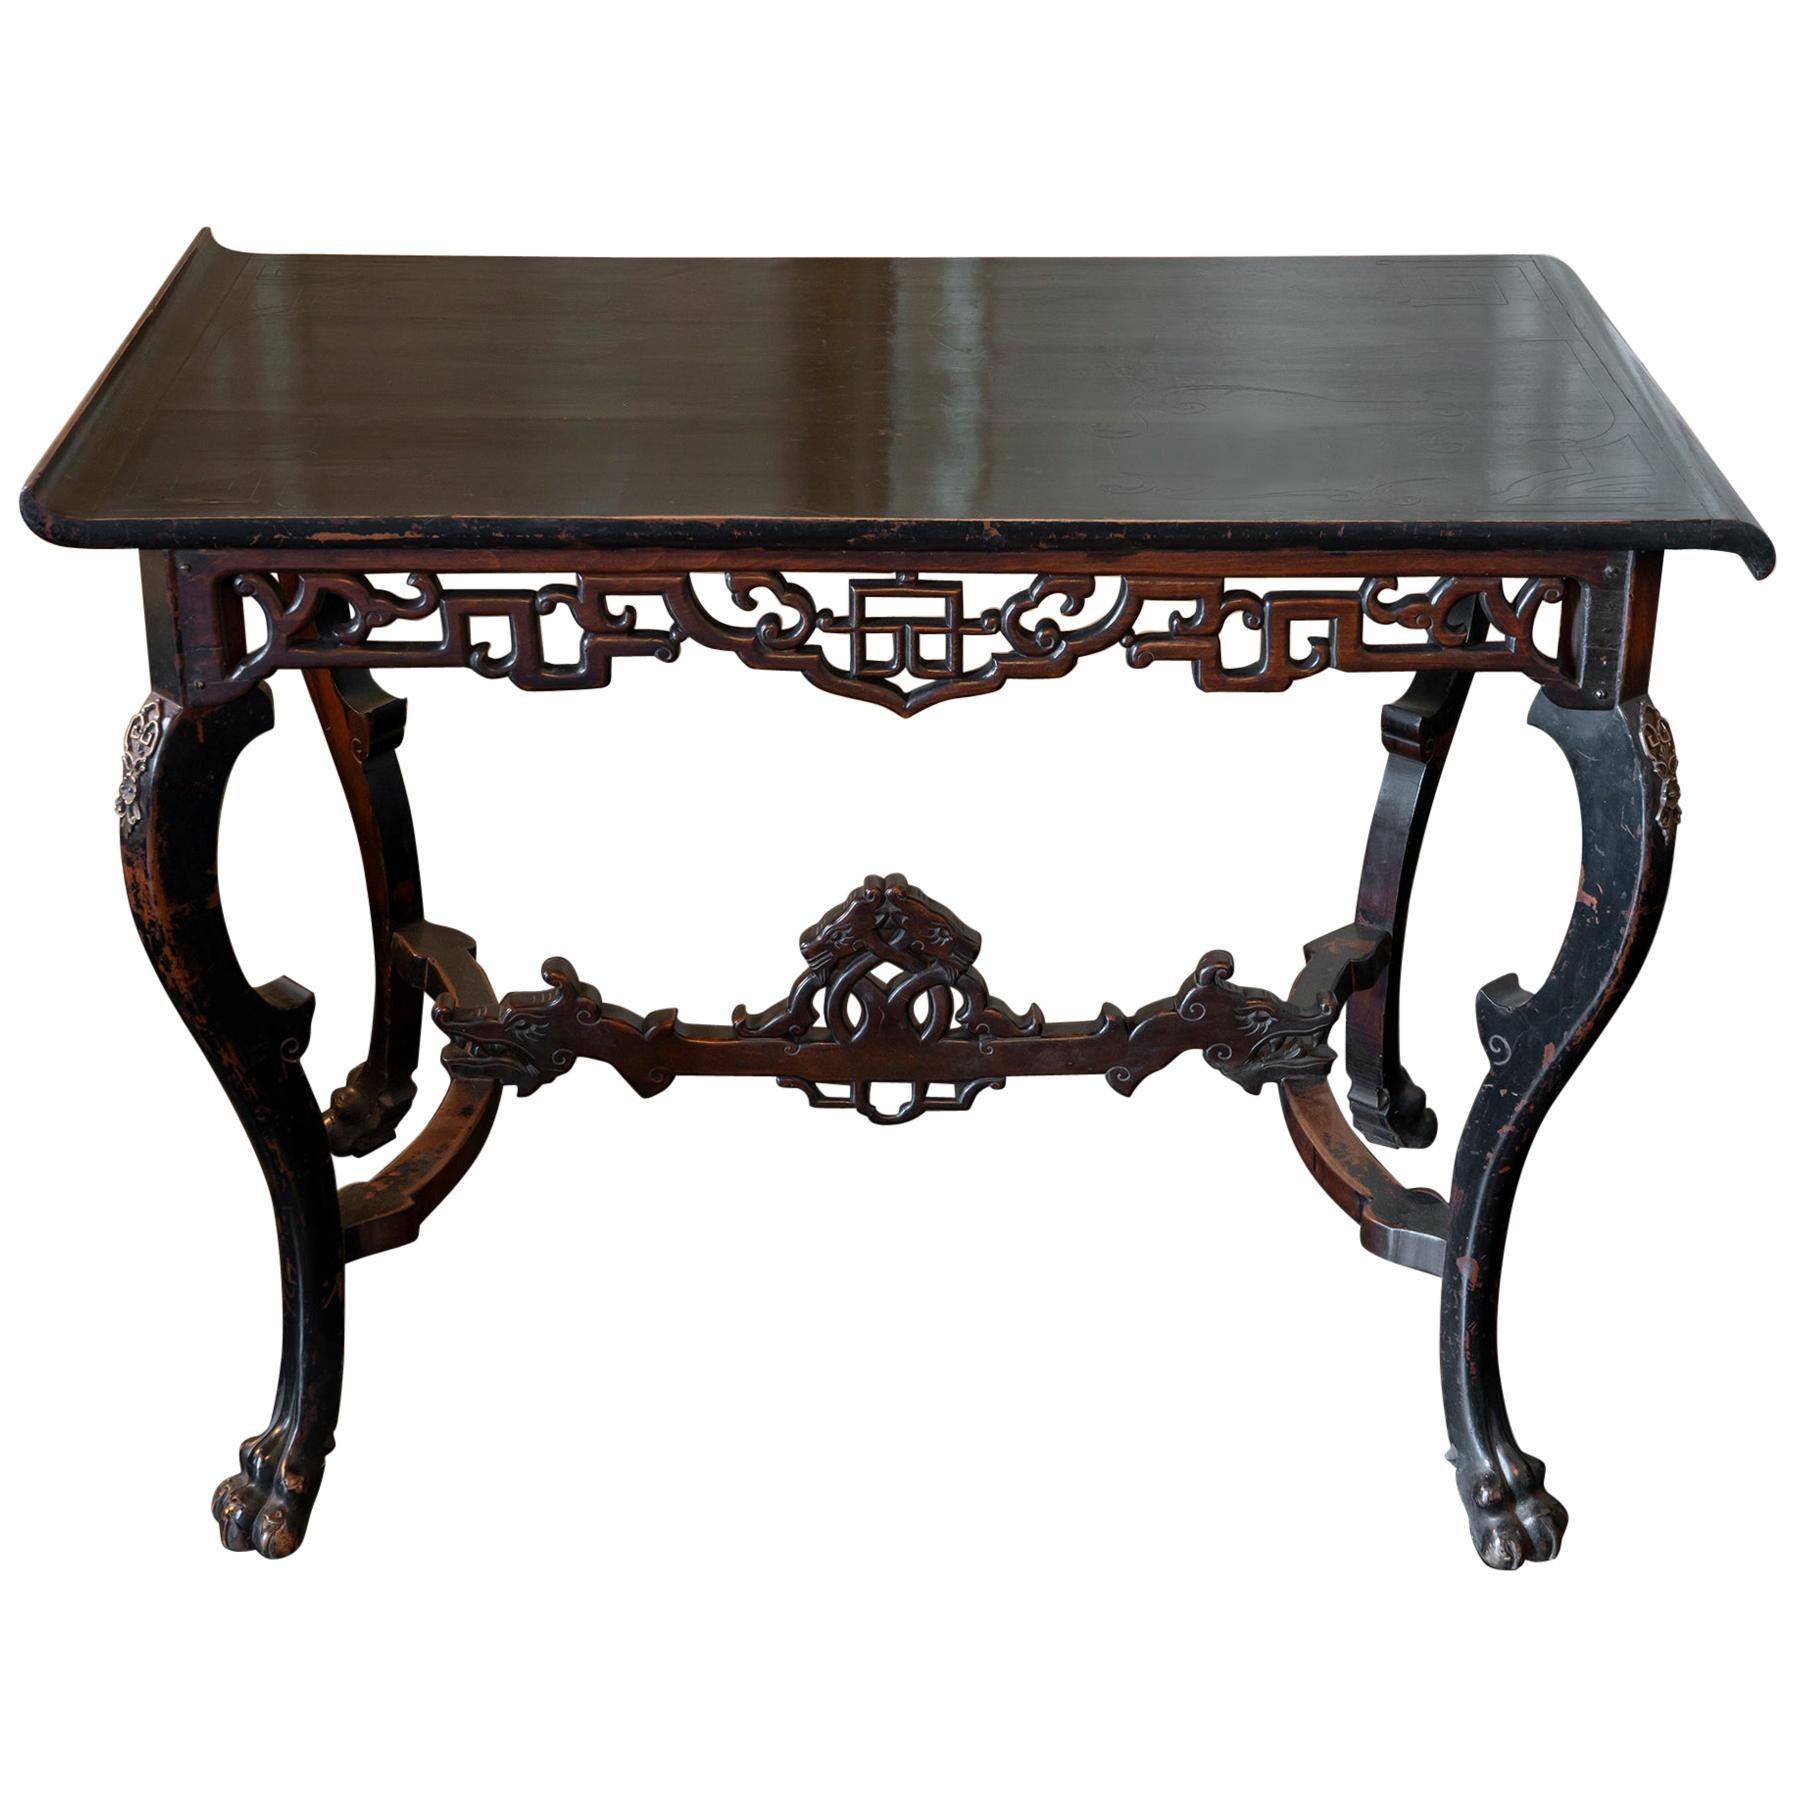 Early 20th Century Chinoiserie Lacquered Desk / Console with Ivory Details